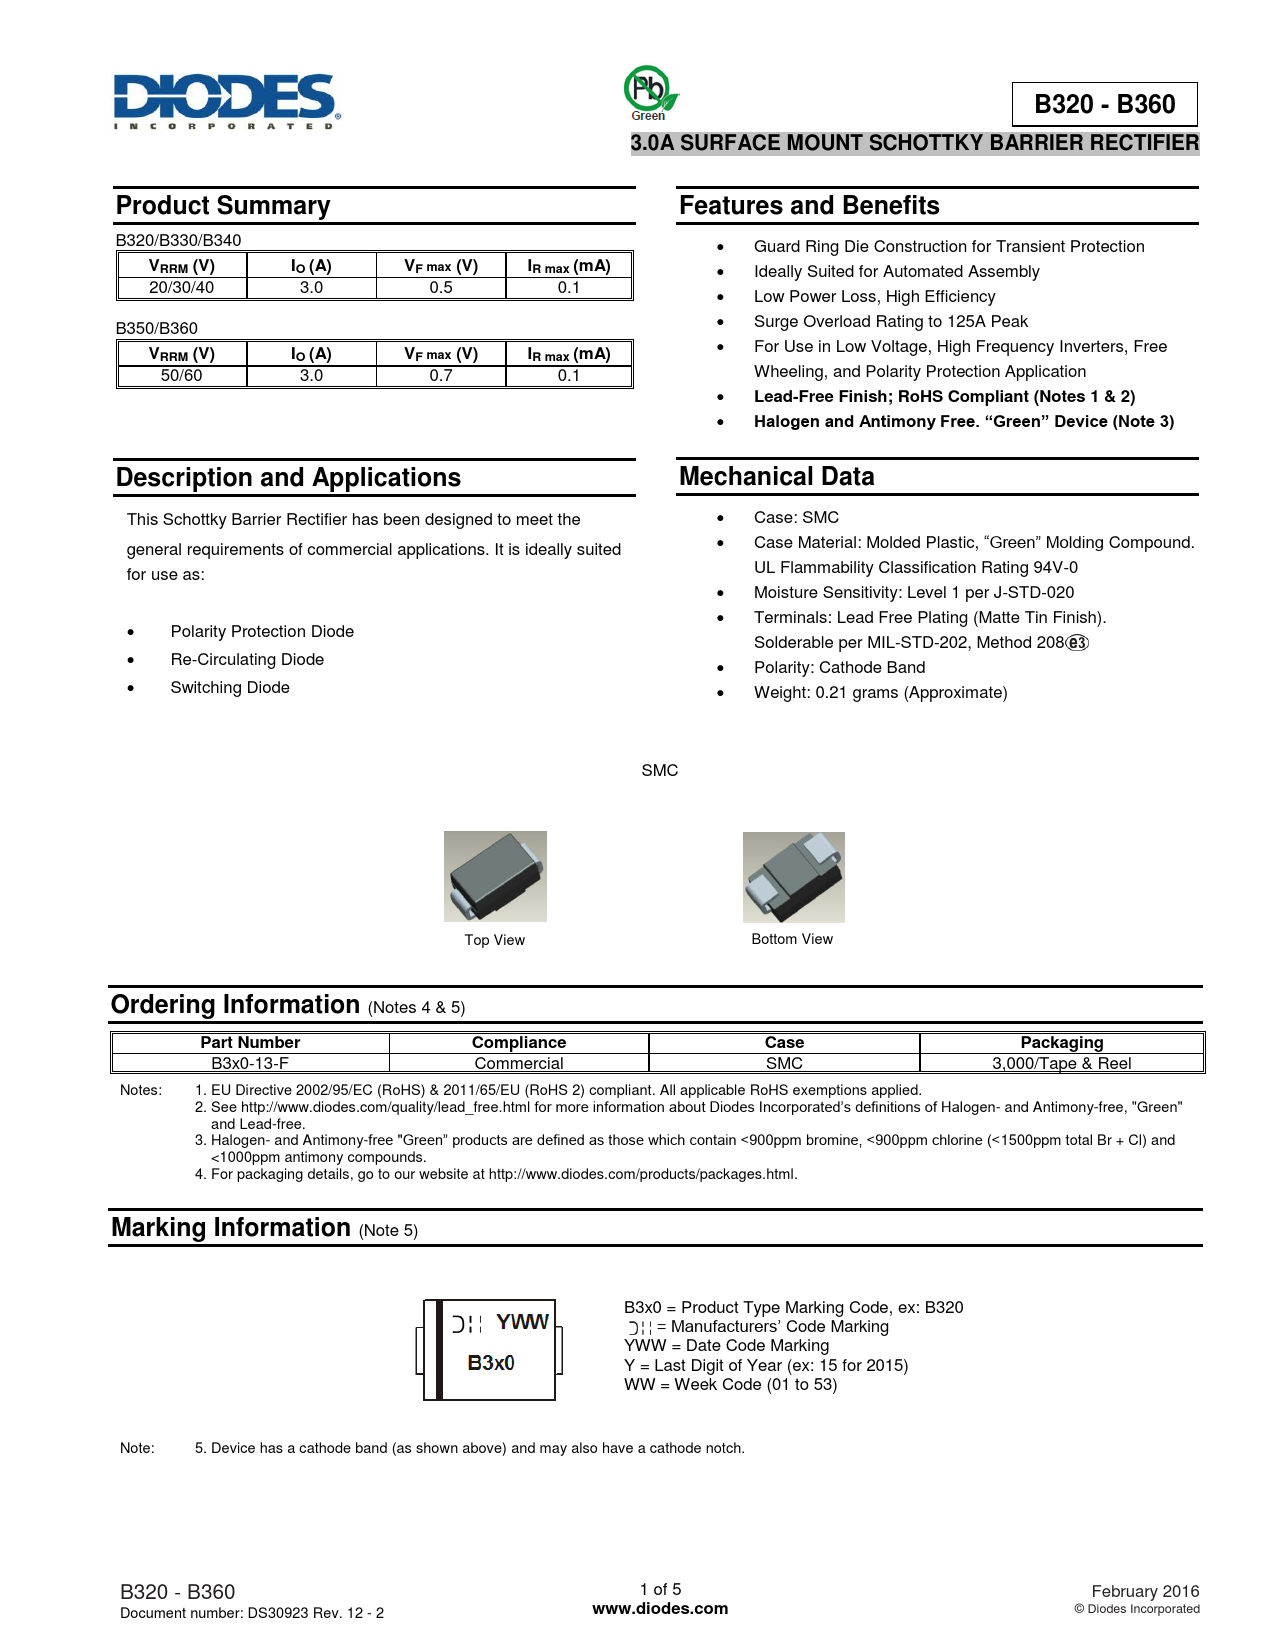 Datasheet B320, B330, B340, B350, B360 Diodes - Preview and Download